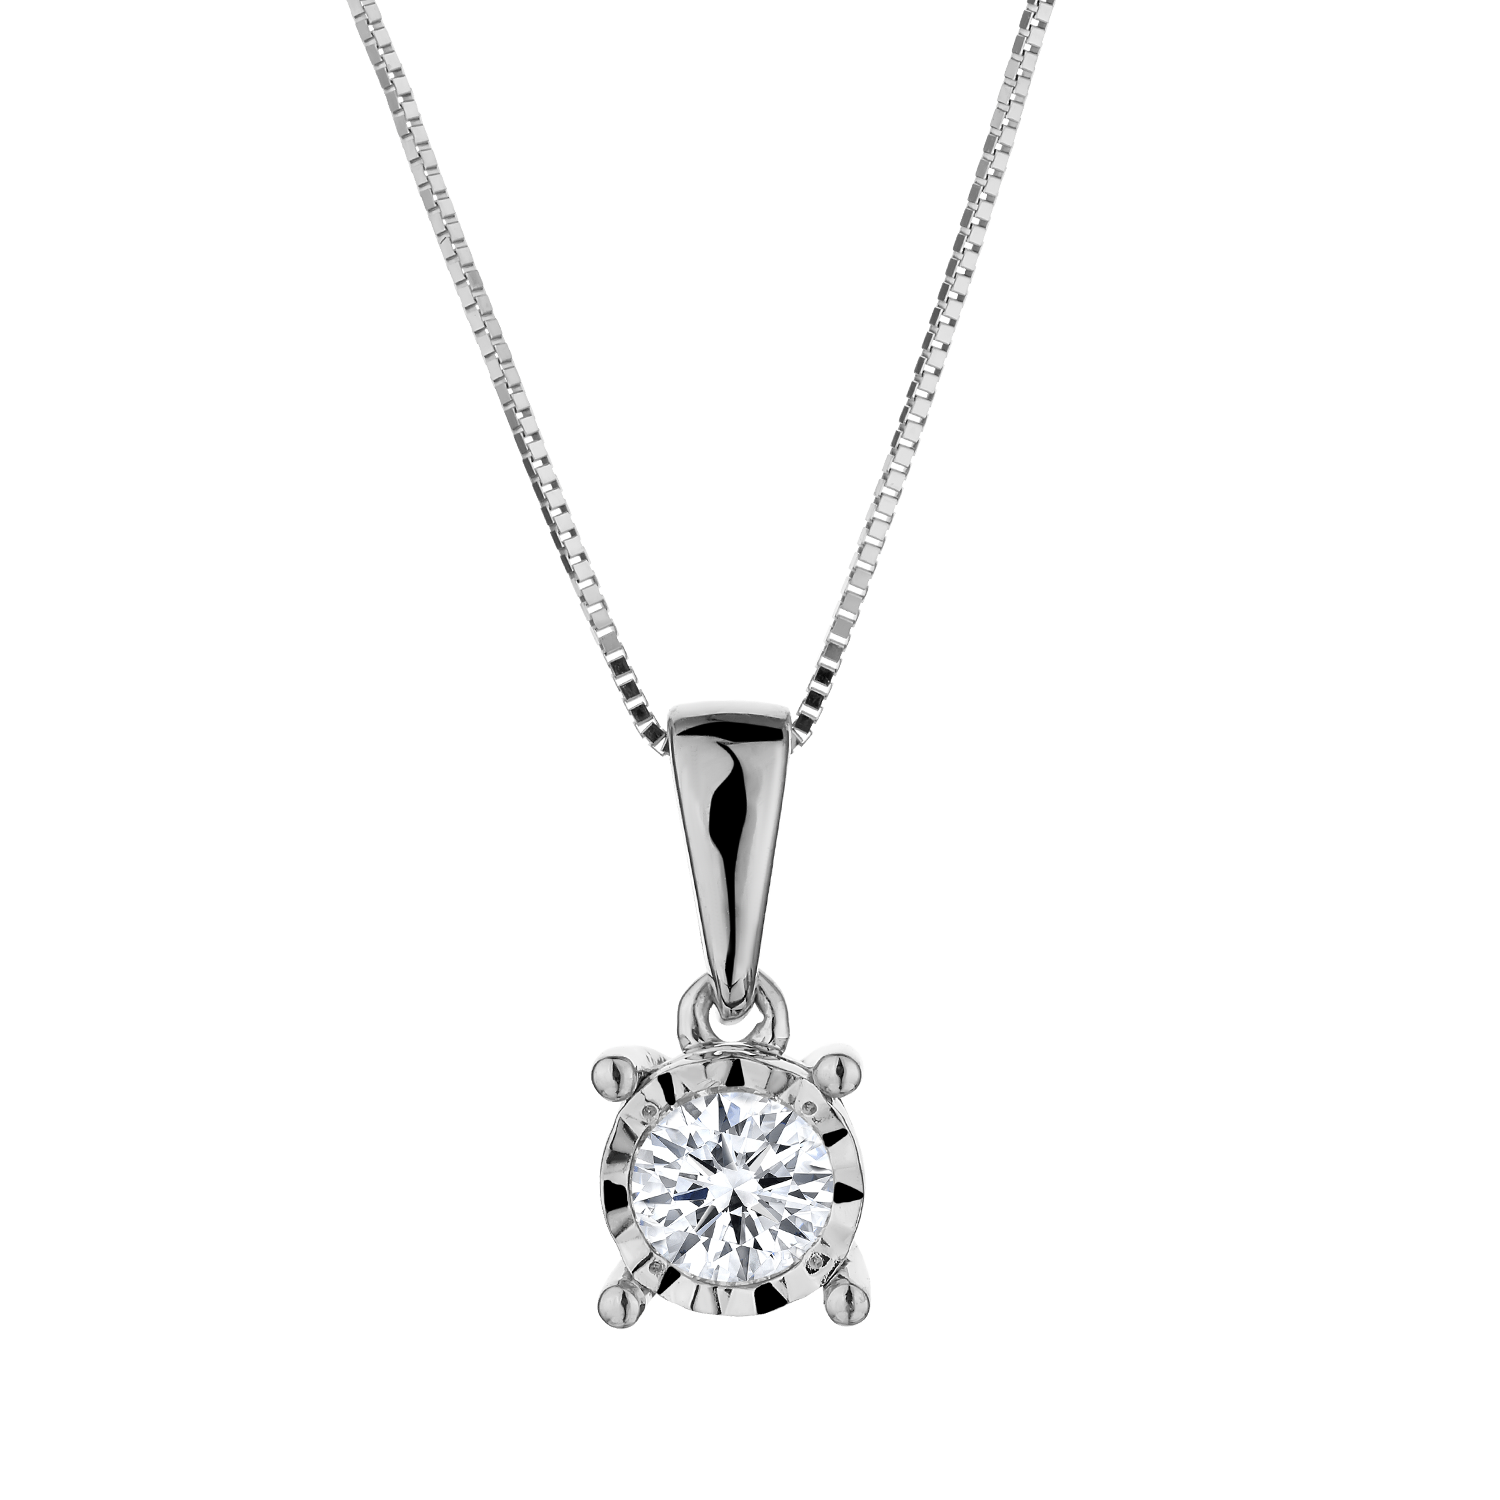 .15 Carat Diamond "Miracle" Pendant,  14kt White Gold. Necklaces and Pendants. Griffin Jewellery Designs.